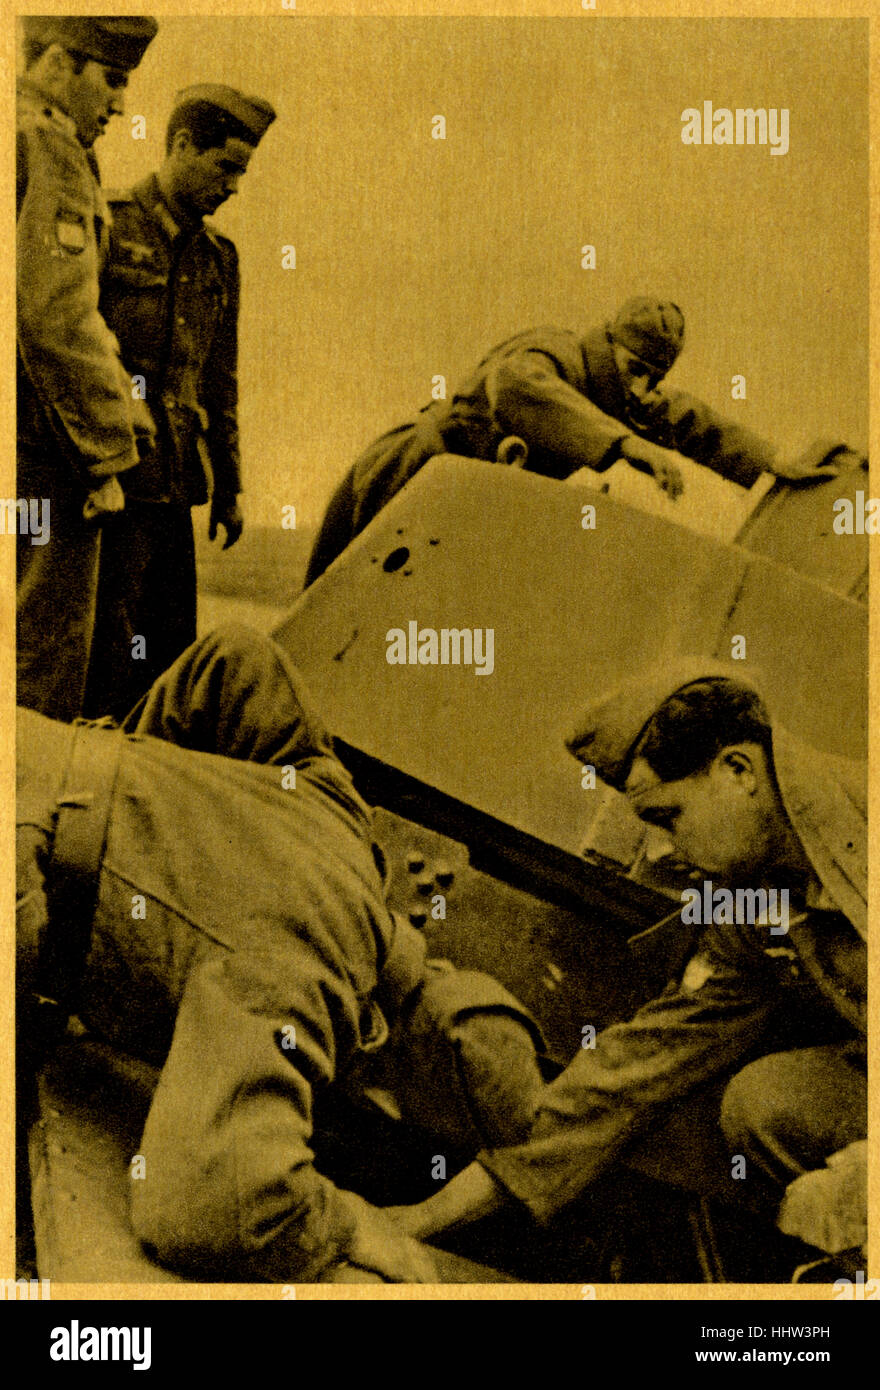 Inspection of a captured Soviet tank . Original caption in Spanish: Inspección de un tanque soviético apresado). From series of cards called 'The European Crusade against Bolshevism: The Blue Brigade' (picture 6) / La cruzada europea contra el bolchevismo. La División Azul. La División Azul was unit of Spanish and Portuguese volunteers that served in the German Army on the Eastern Front of the Second World War. Stock Photo